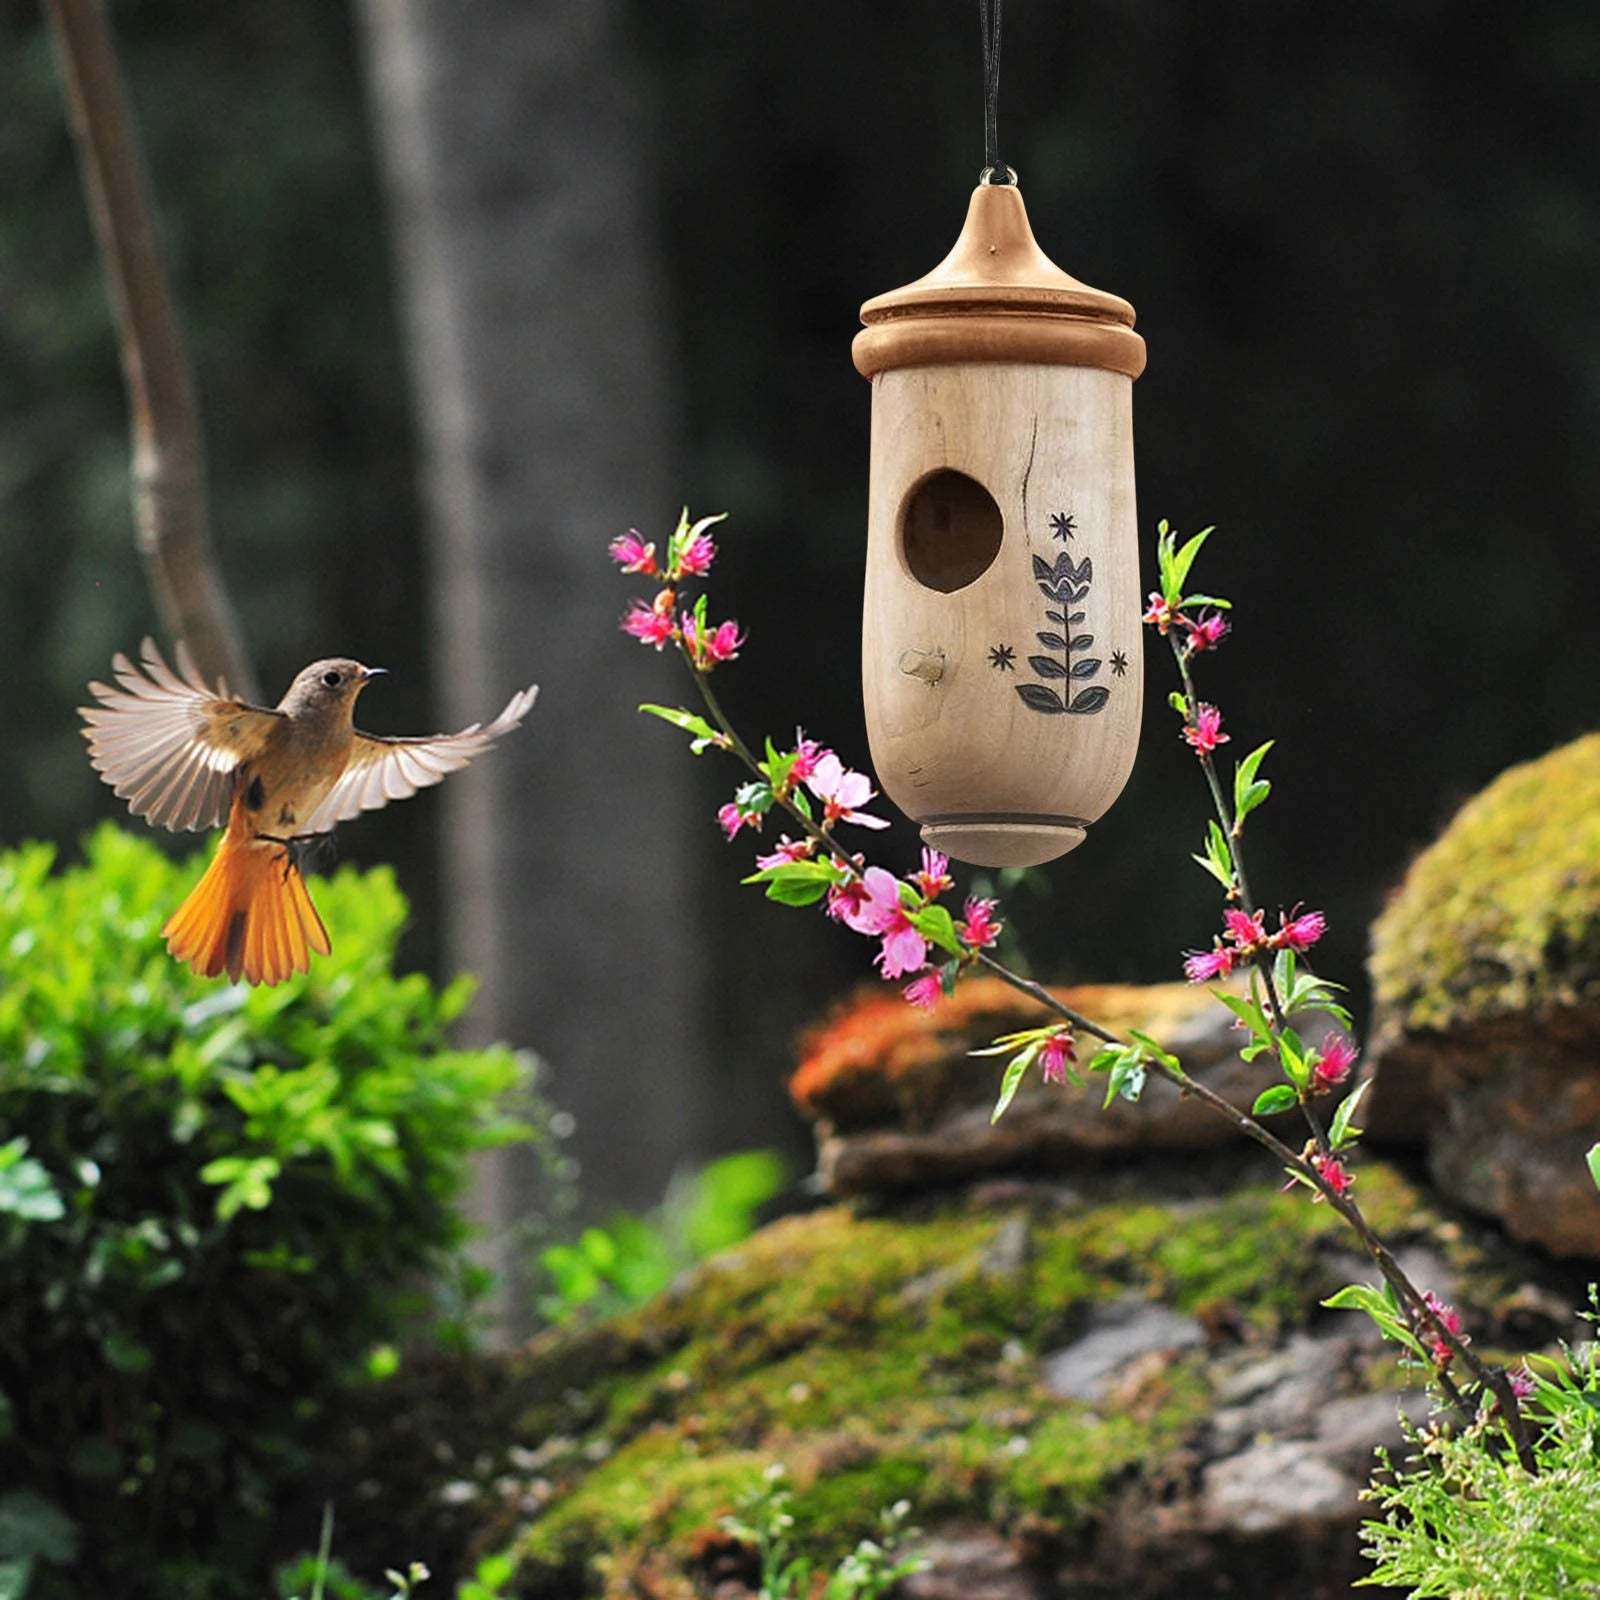 Sale 47% OFF💕Wooden Hummingbird House-Gift for Nature Lovers🔥🔥